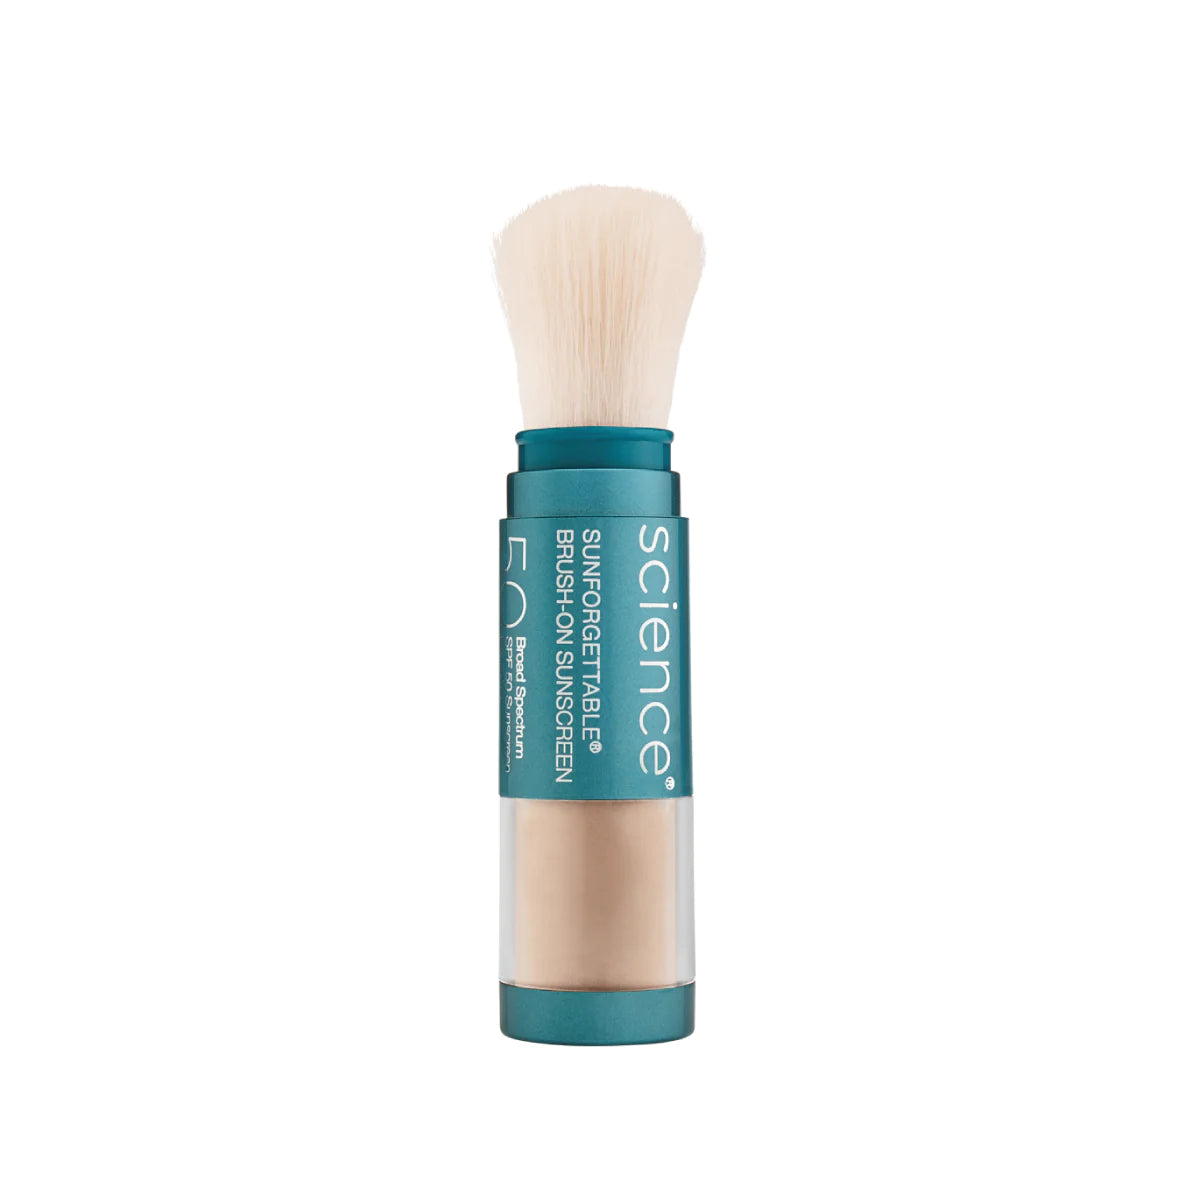 COLORSCIENCE SUNFORGETTABLE TOTAL PROTECTION BRUSH-ON SHIELD (TAN) 6G